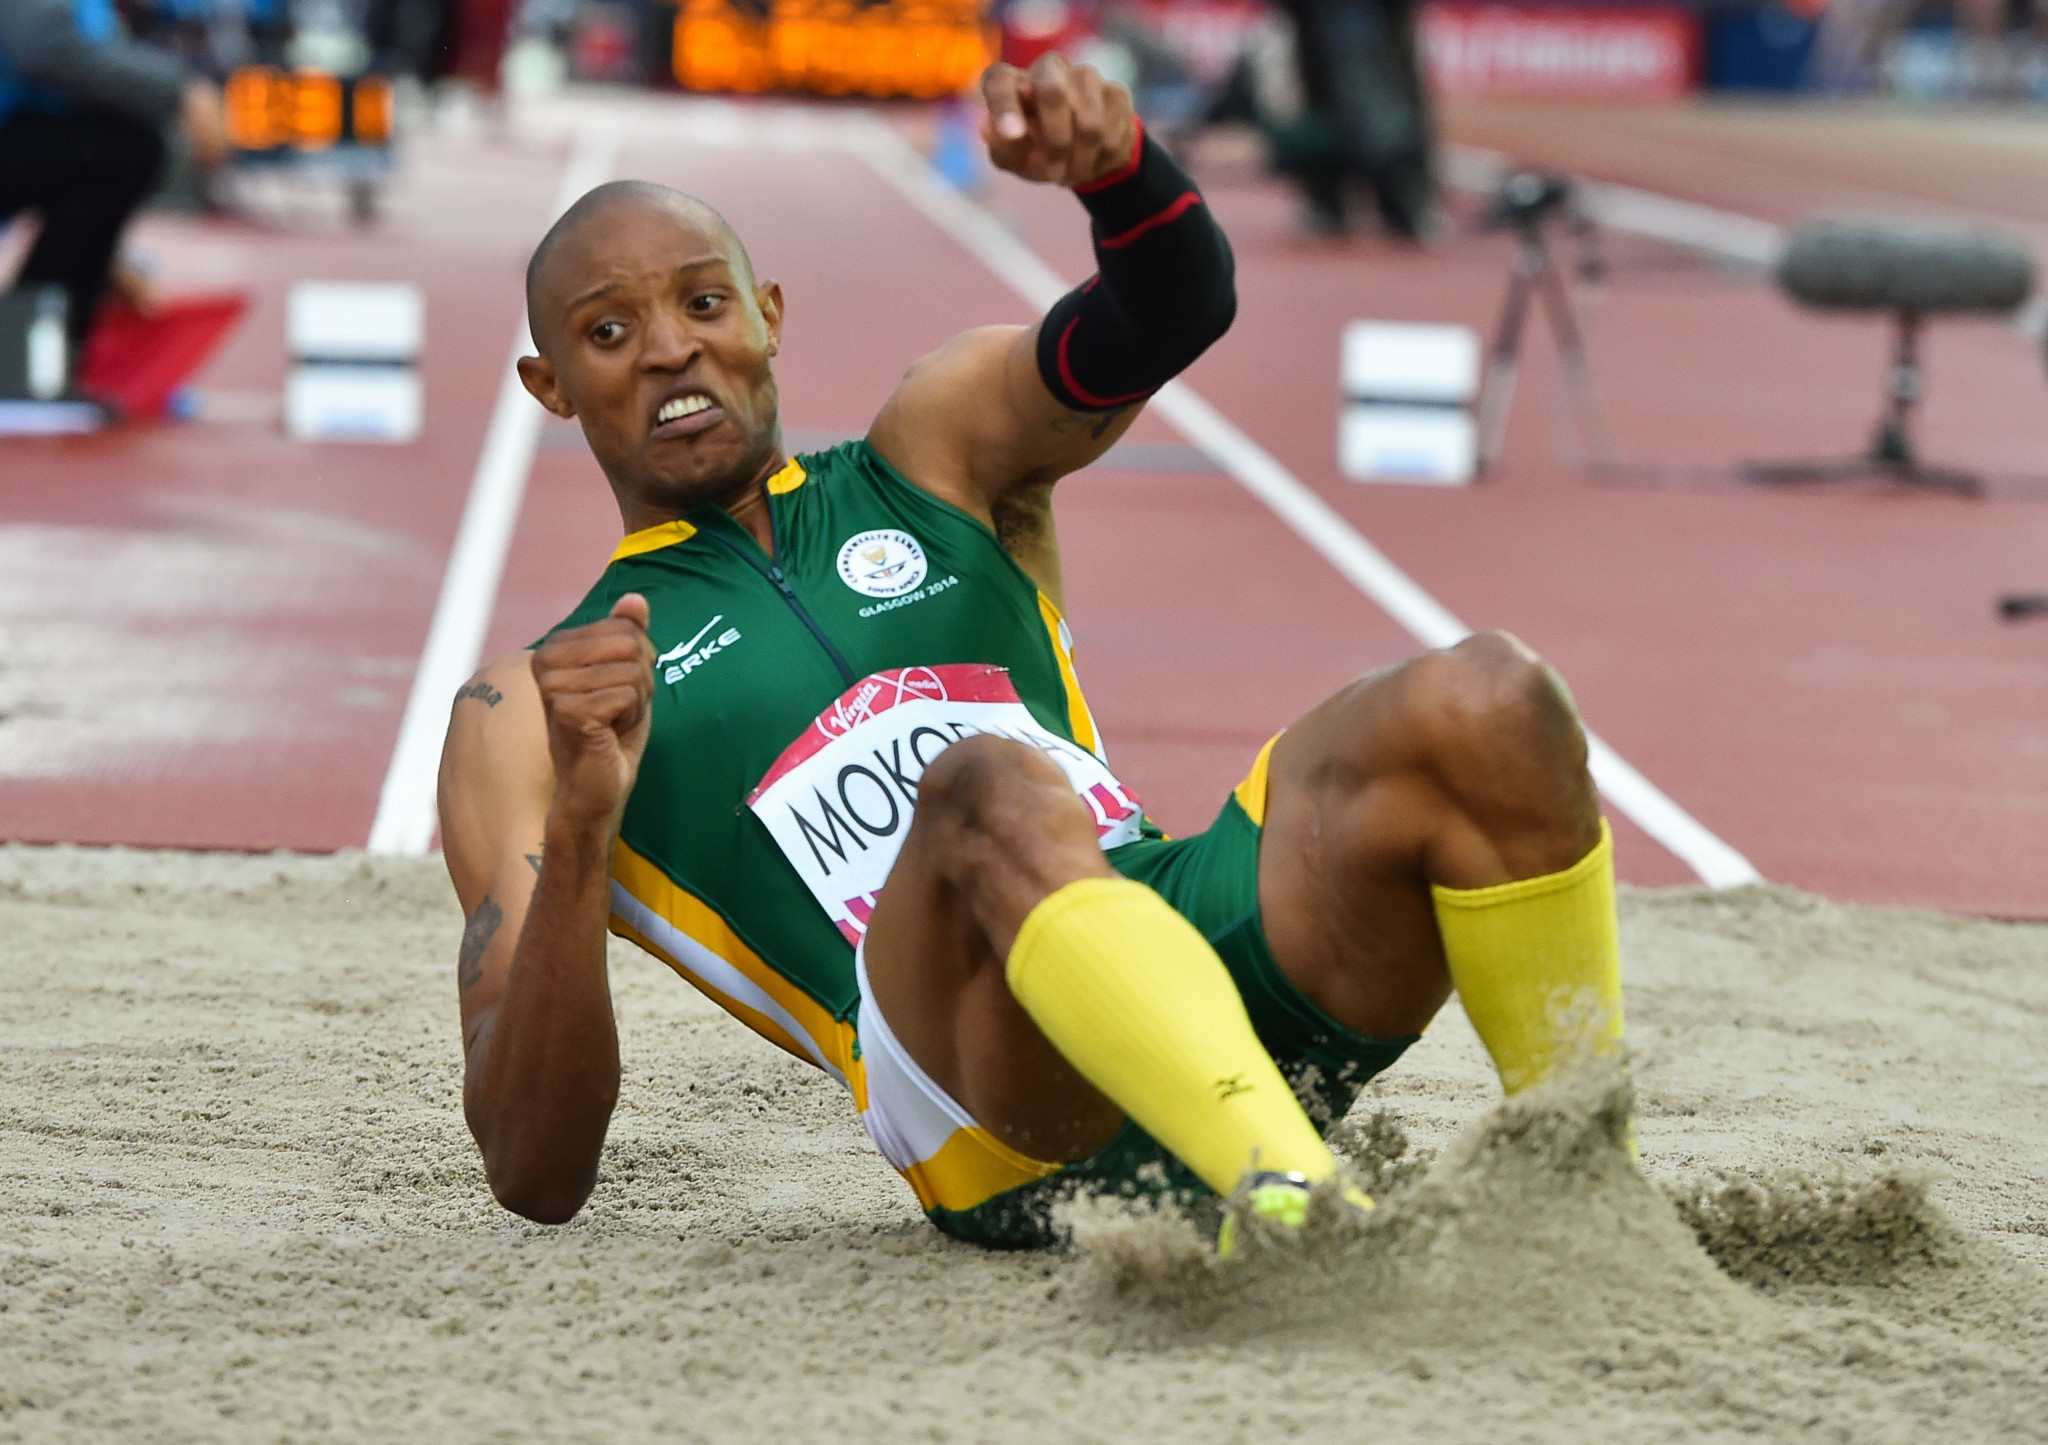 Khotso Mokoena, who won triple jump gold at the Glasgow 2014 Commonwealth Games, is among the athletes to have missed out on a place in South Africa's team for Gold Coast 2018 ©Getty Images